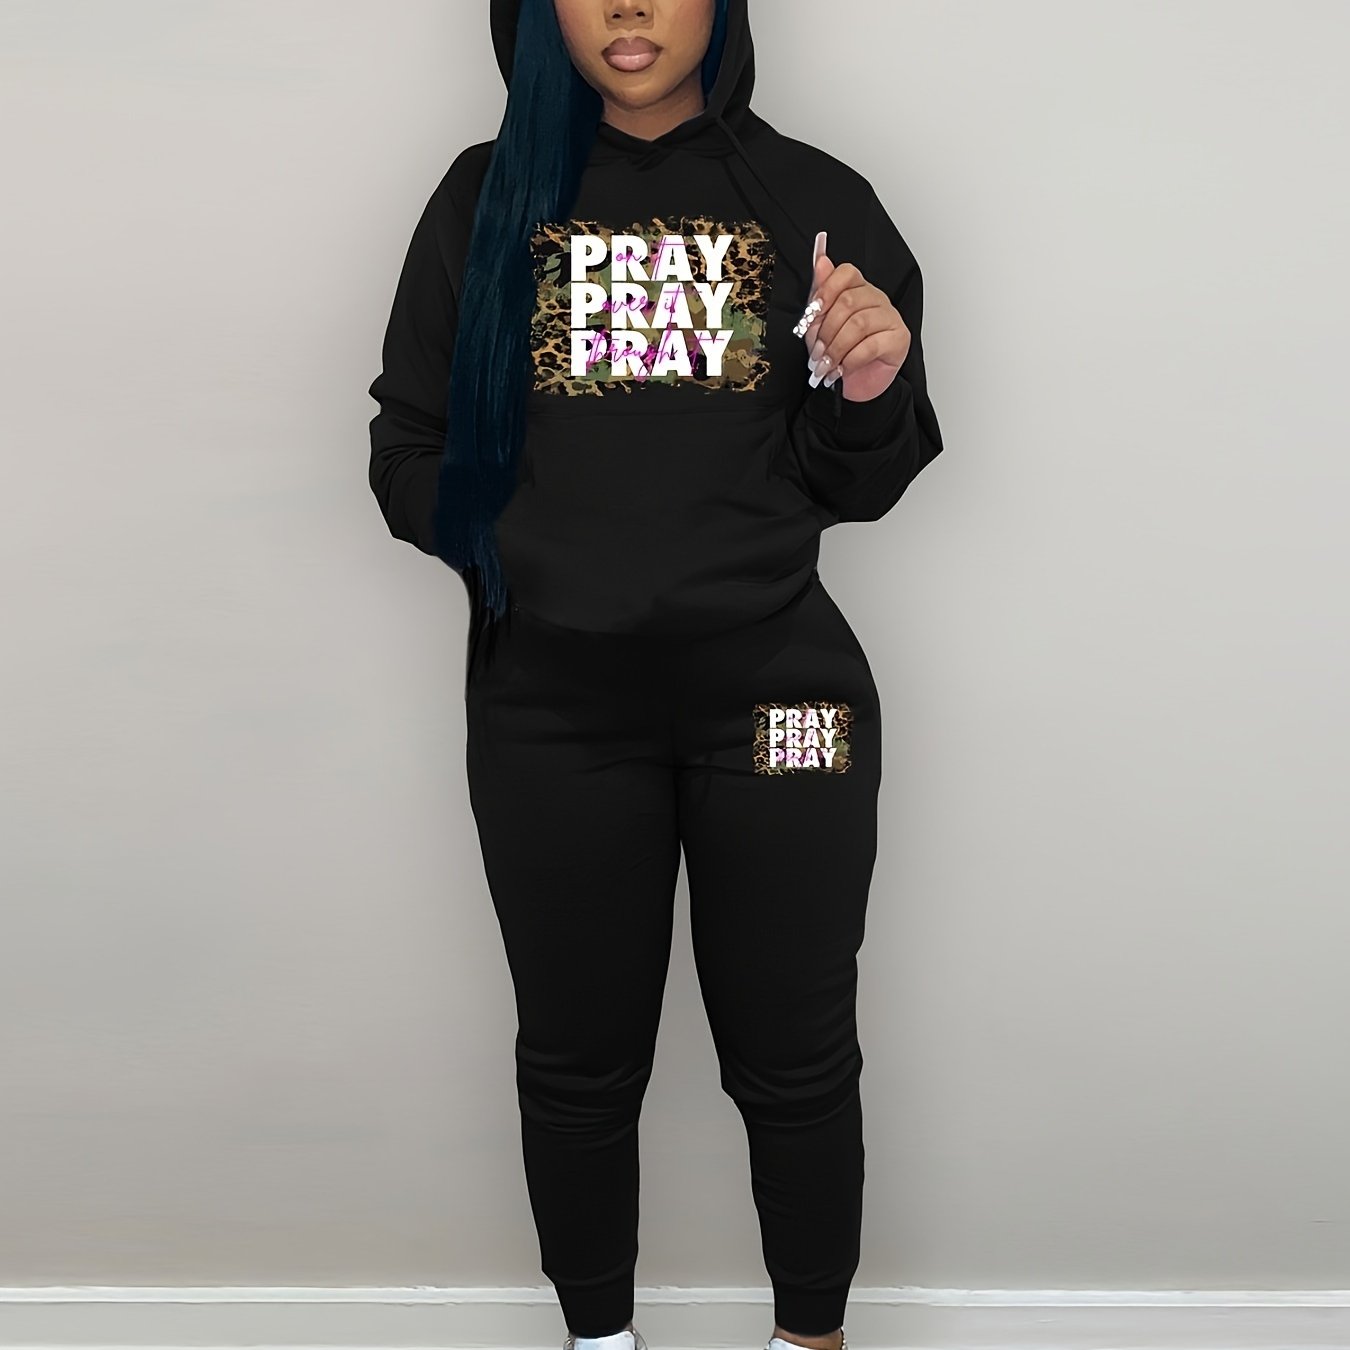 Pray On It Pray Over It Pray Through It Women's Christian Casual Outfit claimedbygoddesigns